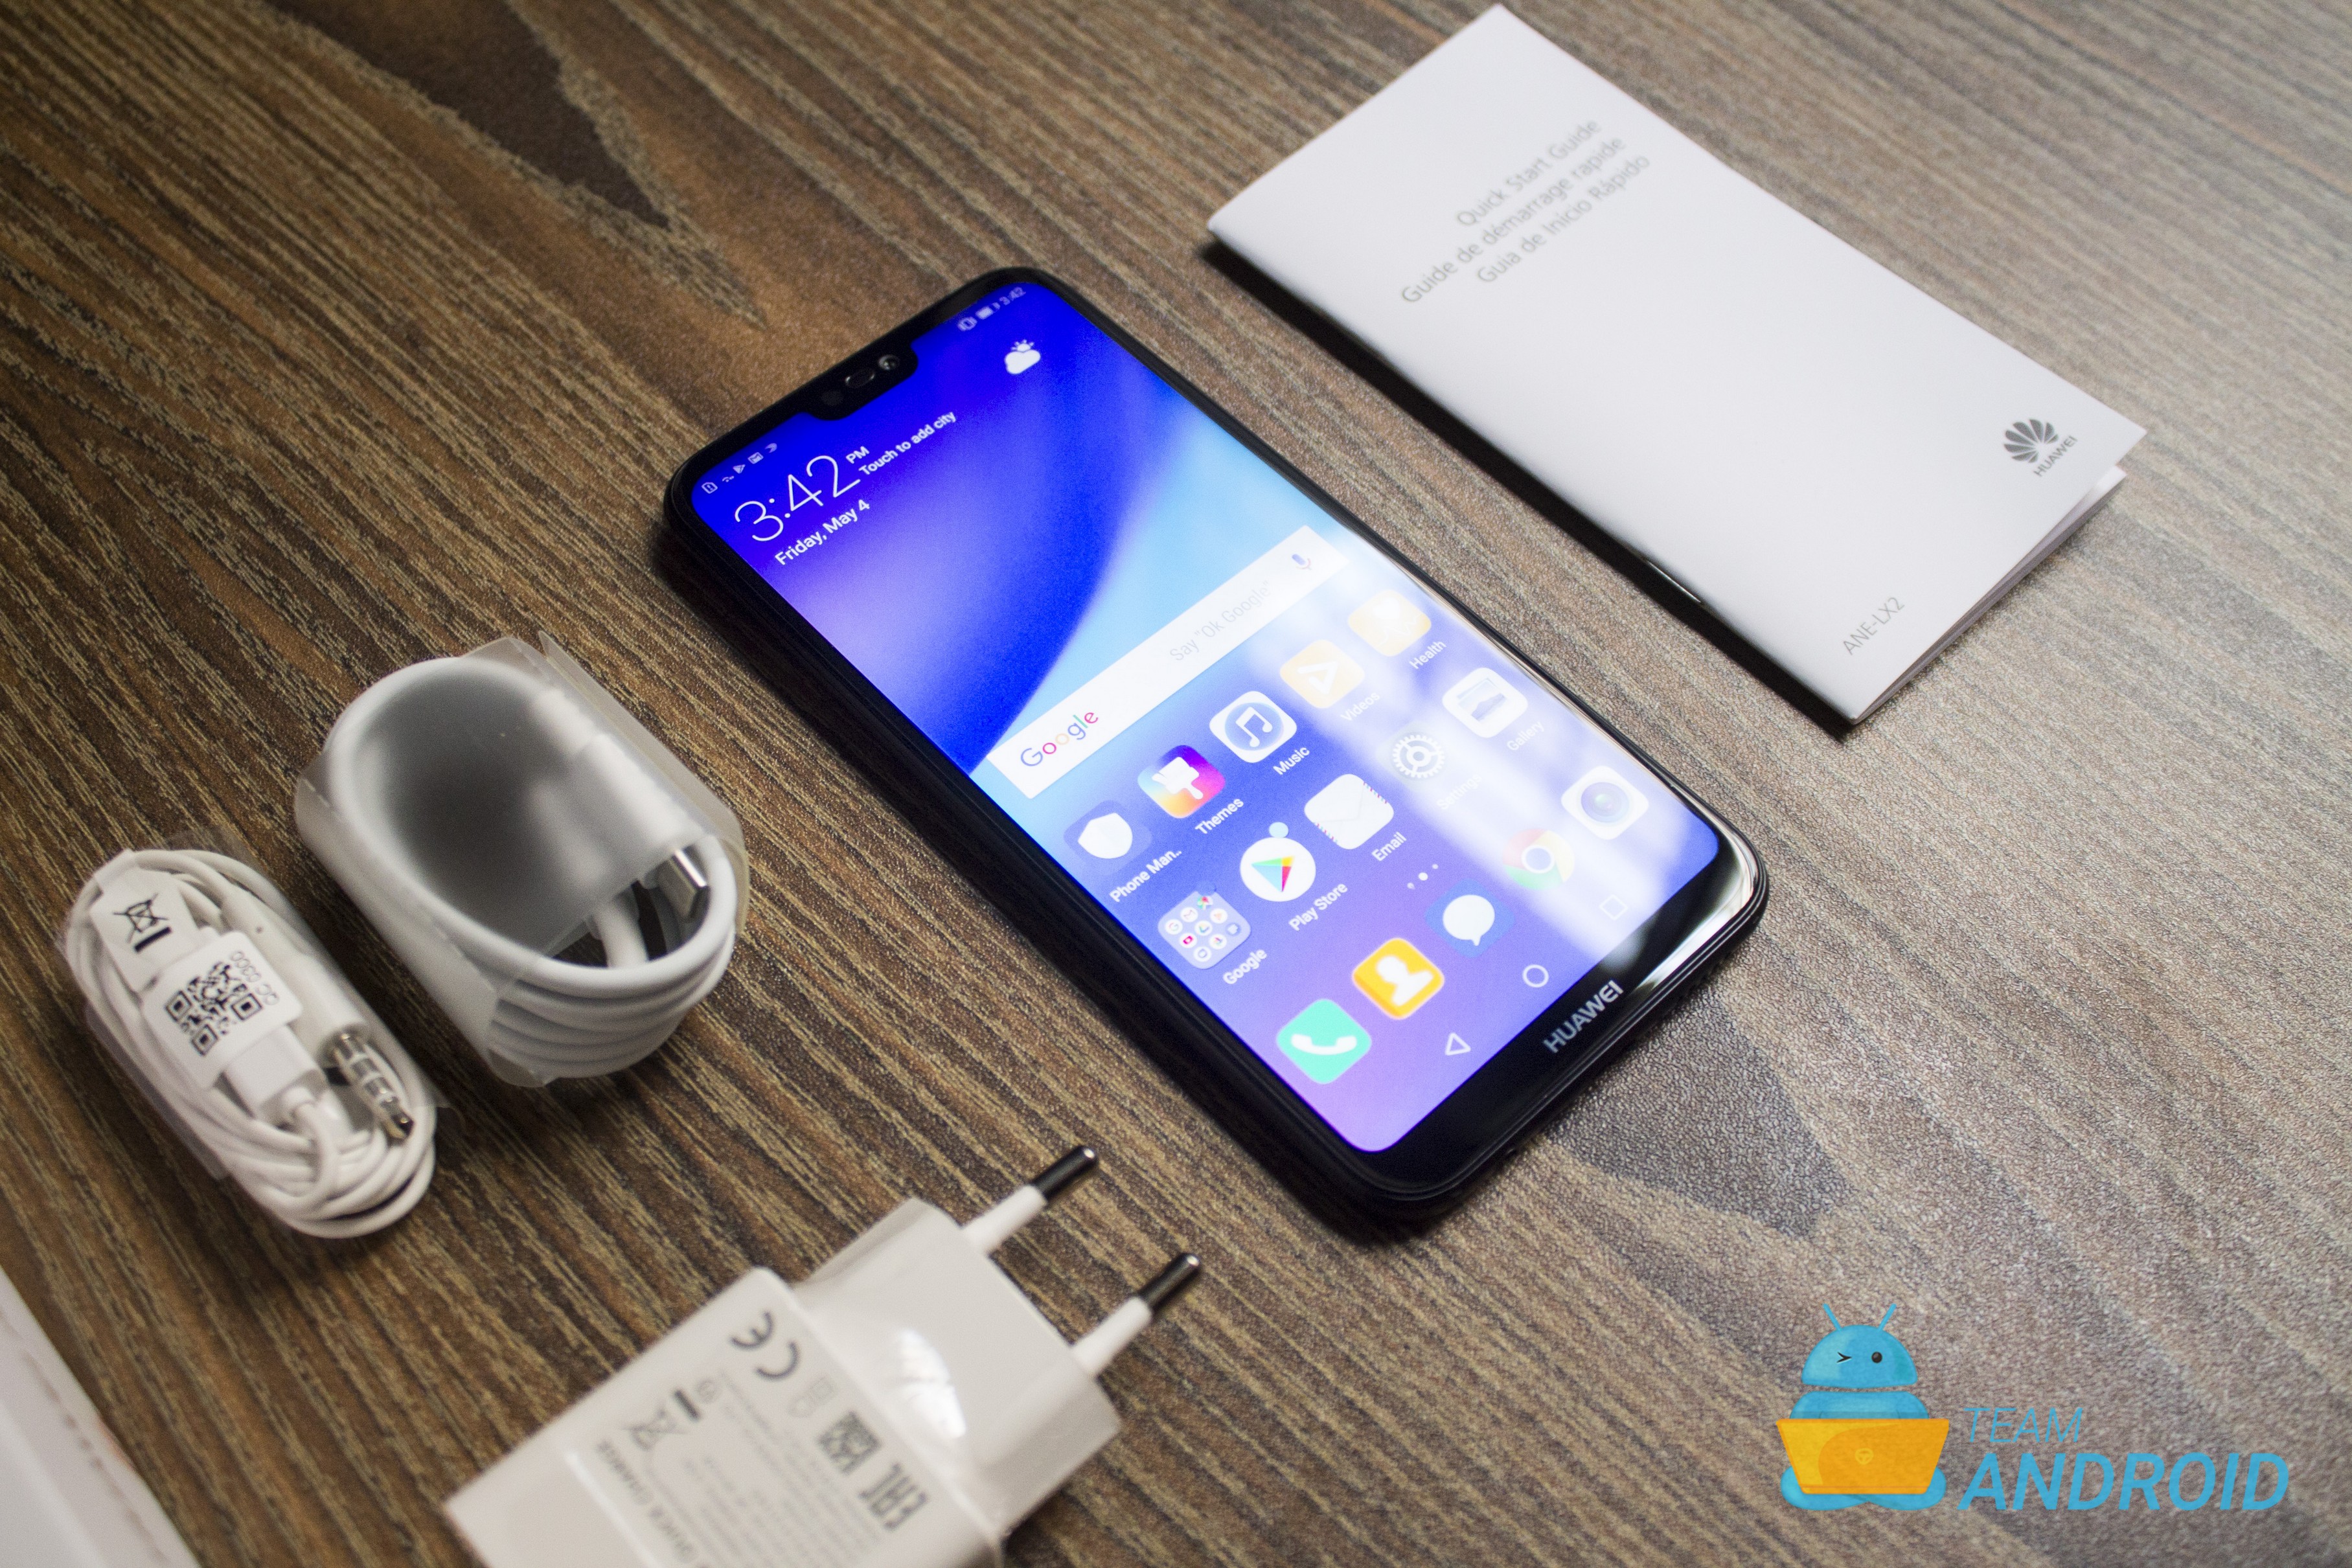 Huawei P20 Lite: Unboxing and First Impressions 3